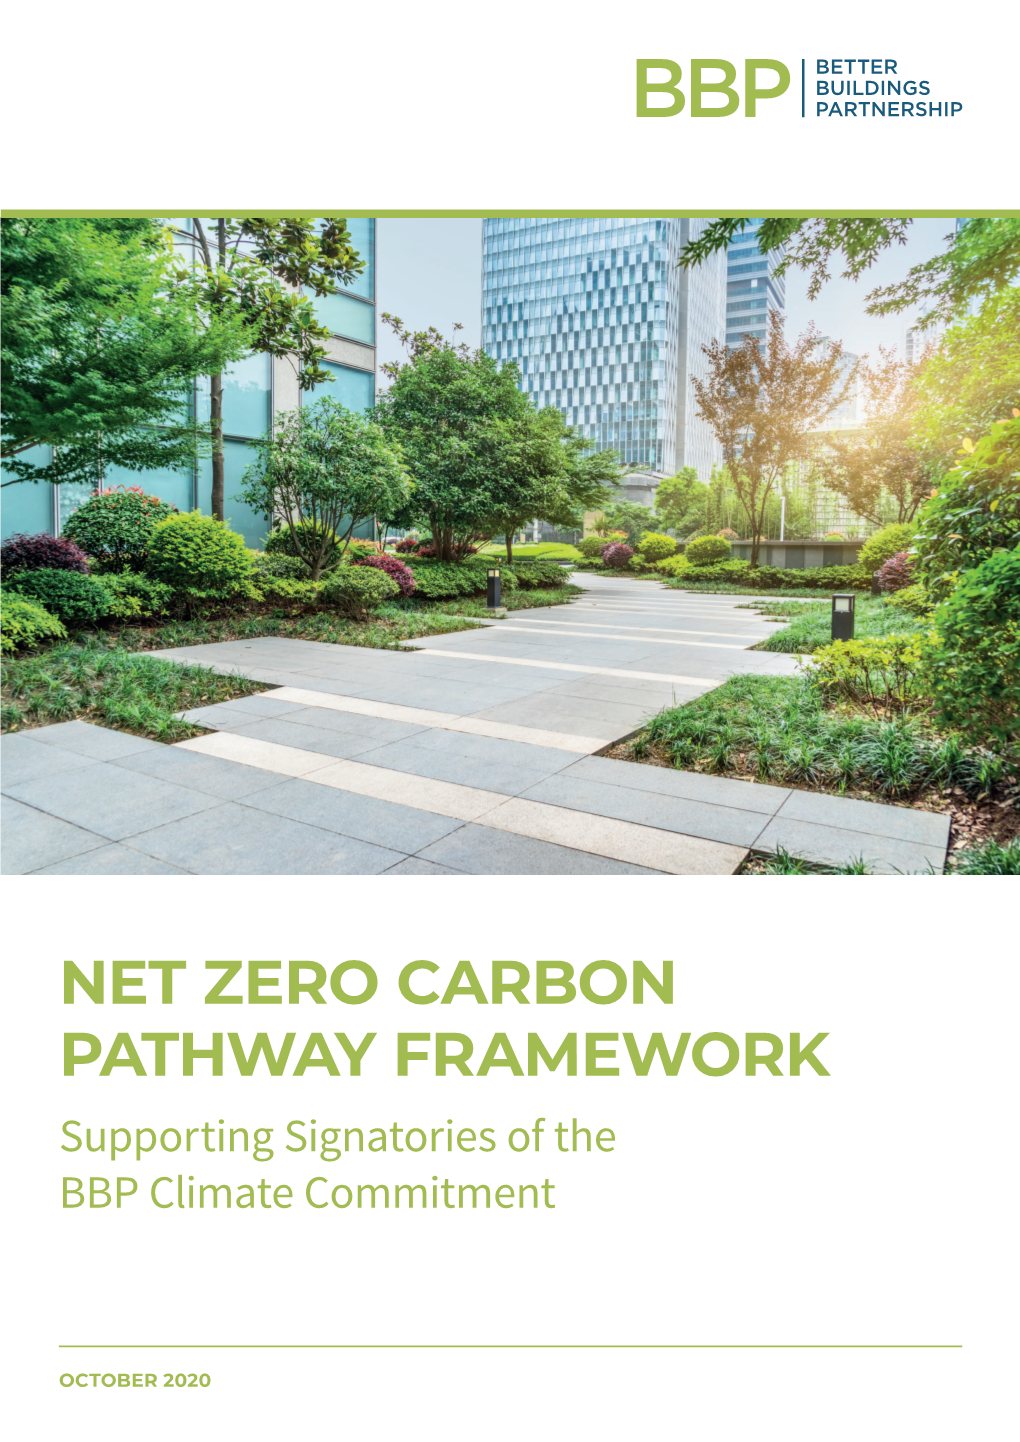 NET ZERO CARBON PATHWAY FRAMEWORK Supporting Signatories of the BBP Climate Commitment